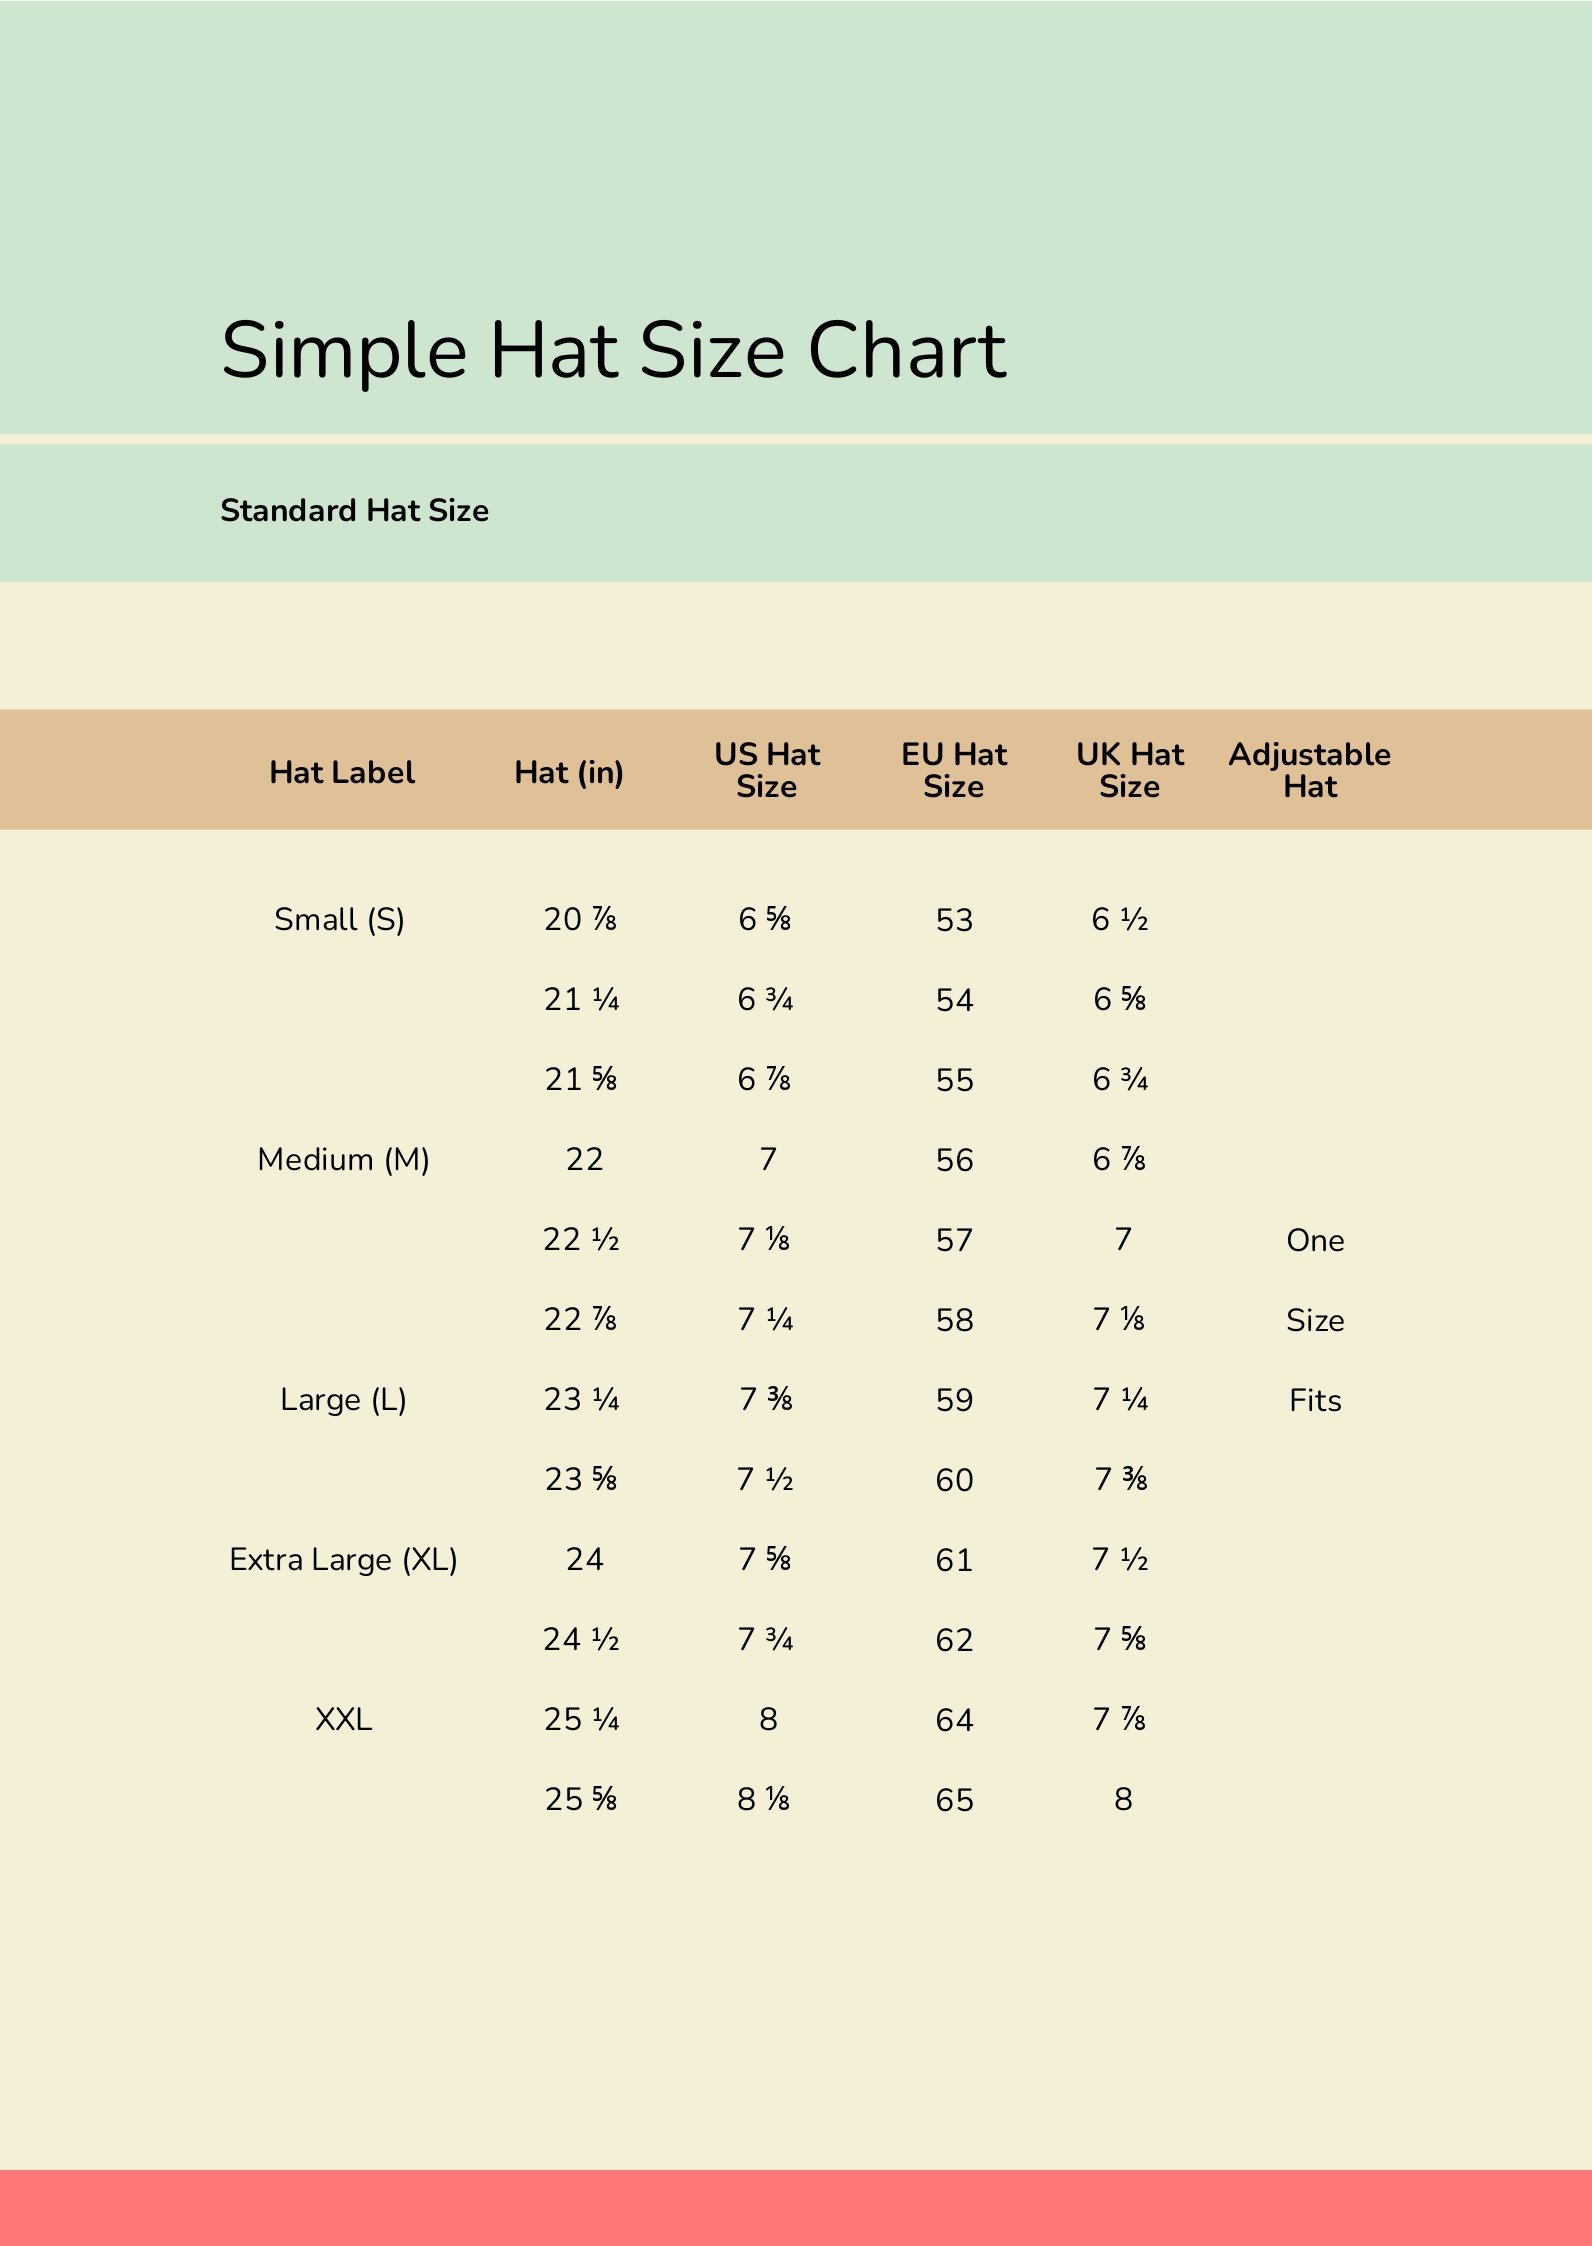 Simple Hat Size Chart in PDF - Download | Template.net